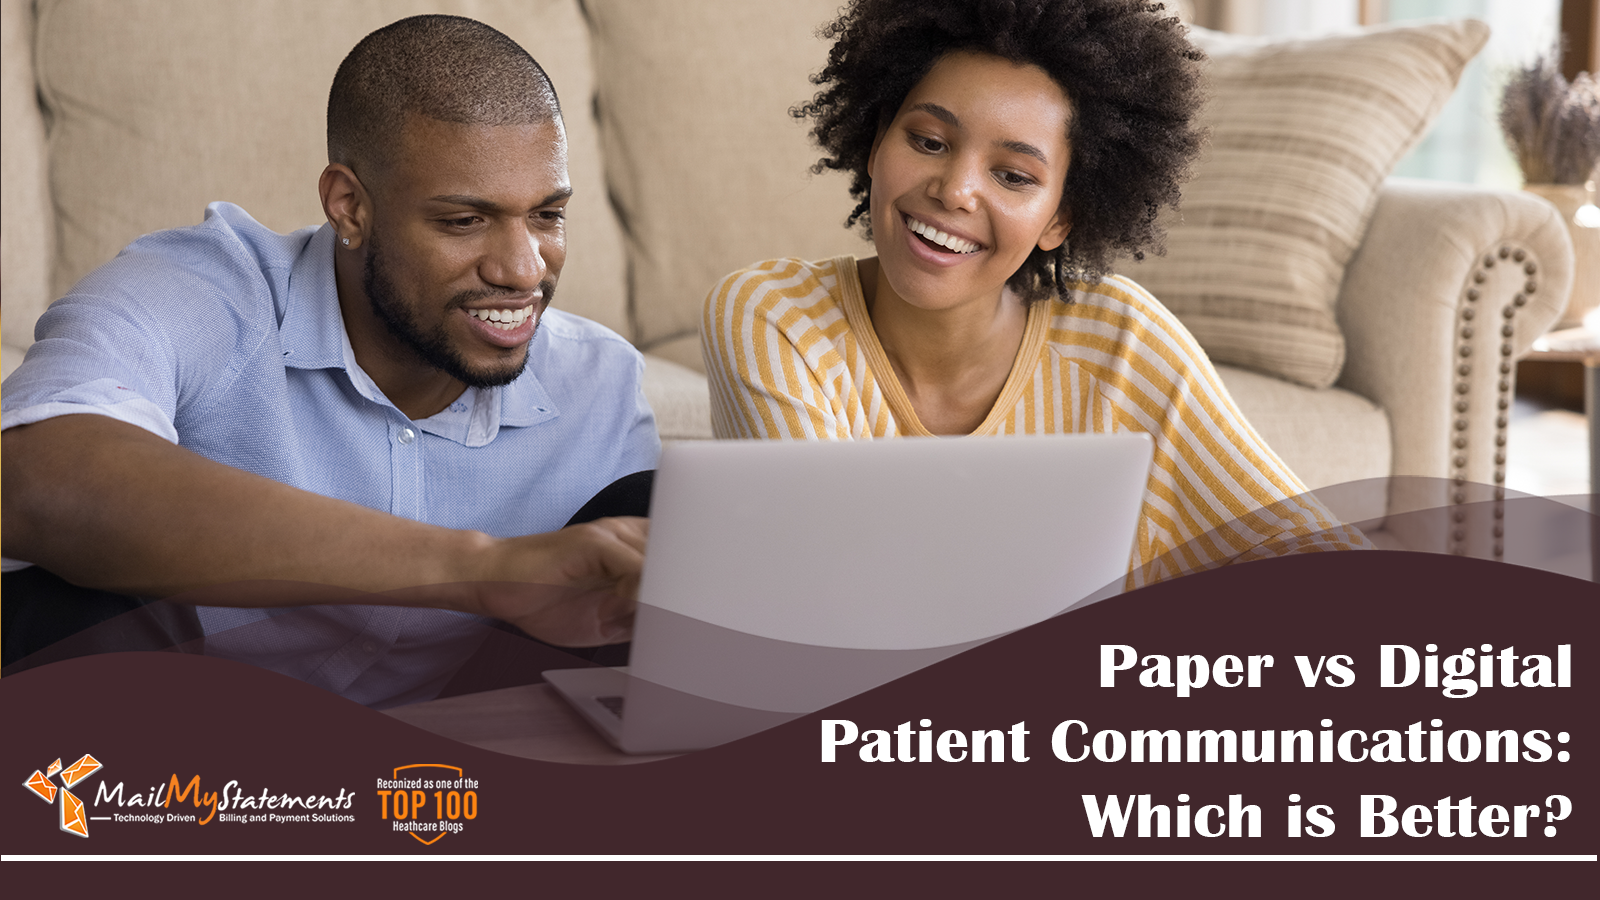 Paper vs Digital Patient Communications: Which is Better?